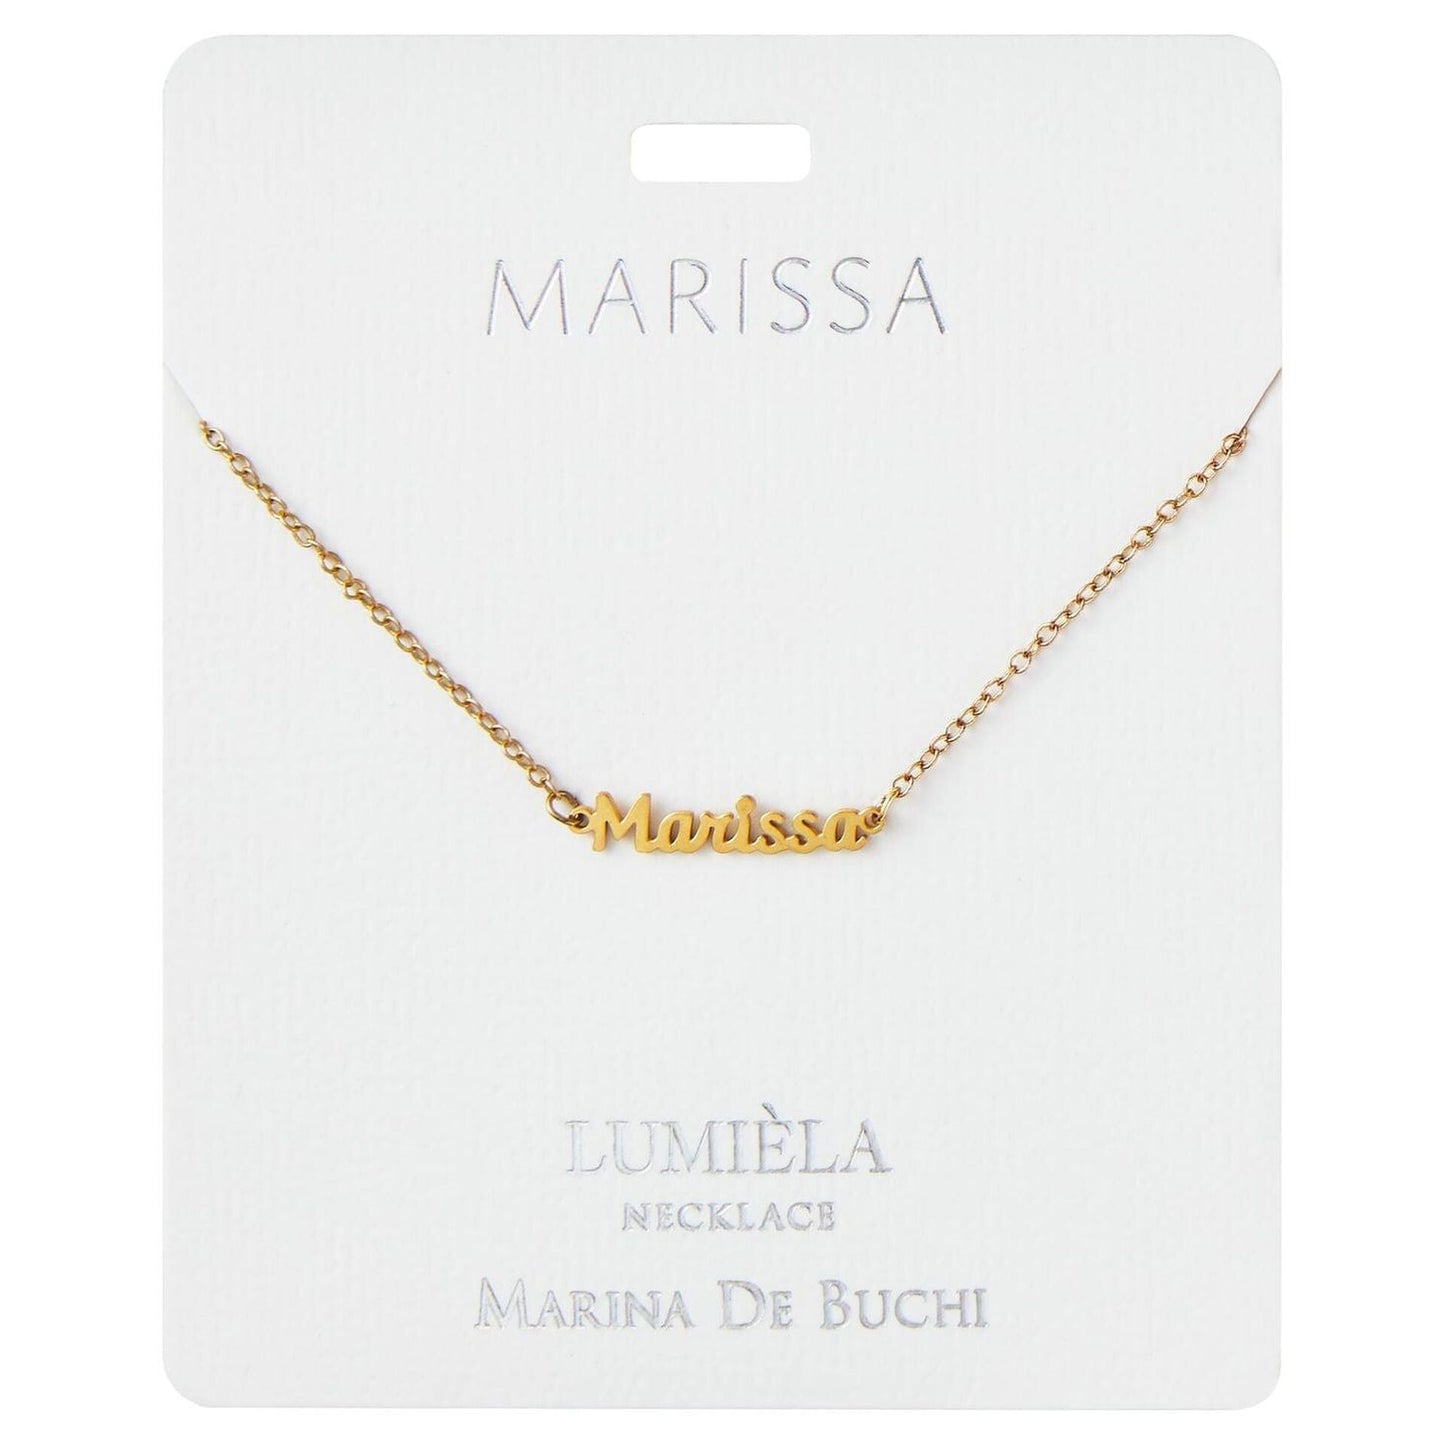 Lumiela Personalized Nameplate Lauren Necklace in Gold Tone